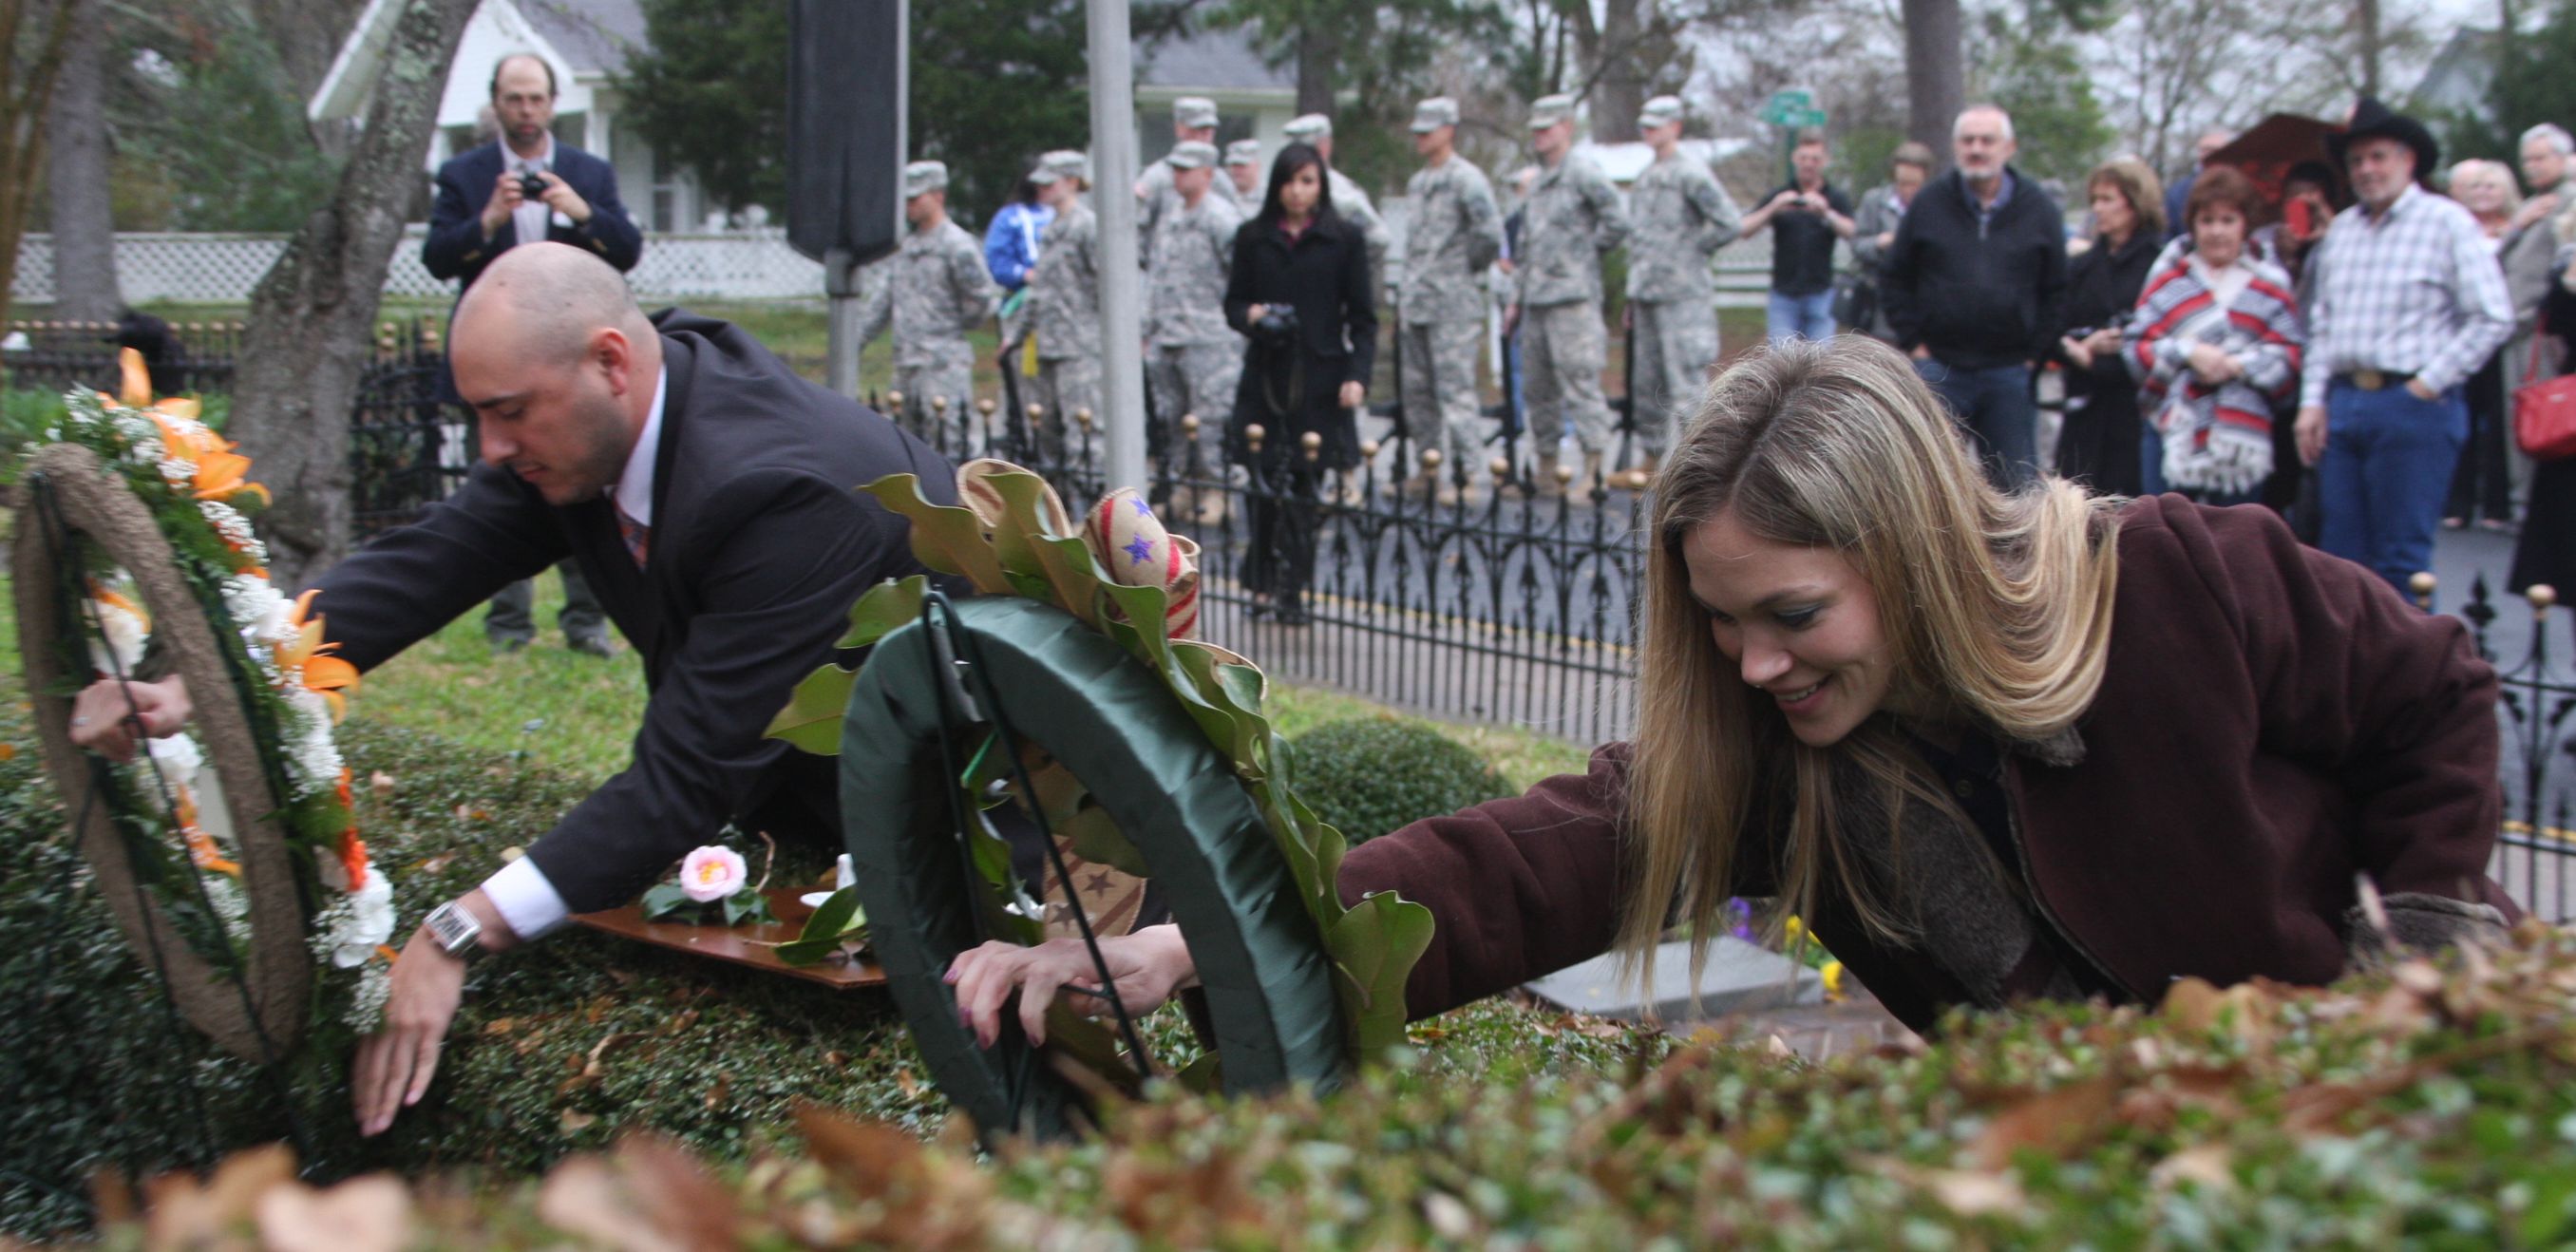 Wreaths are placed on Gen. Sam Houston's grave